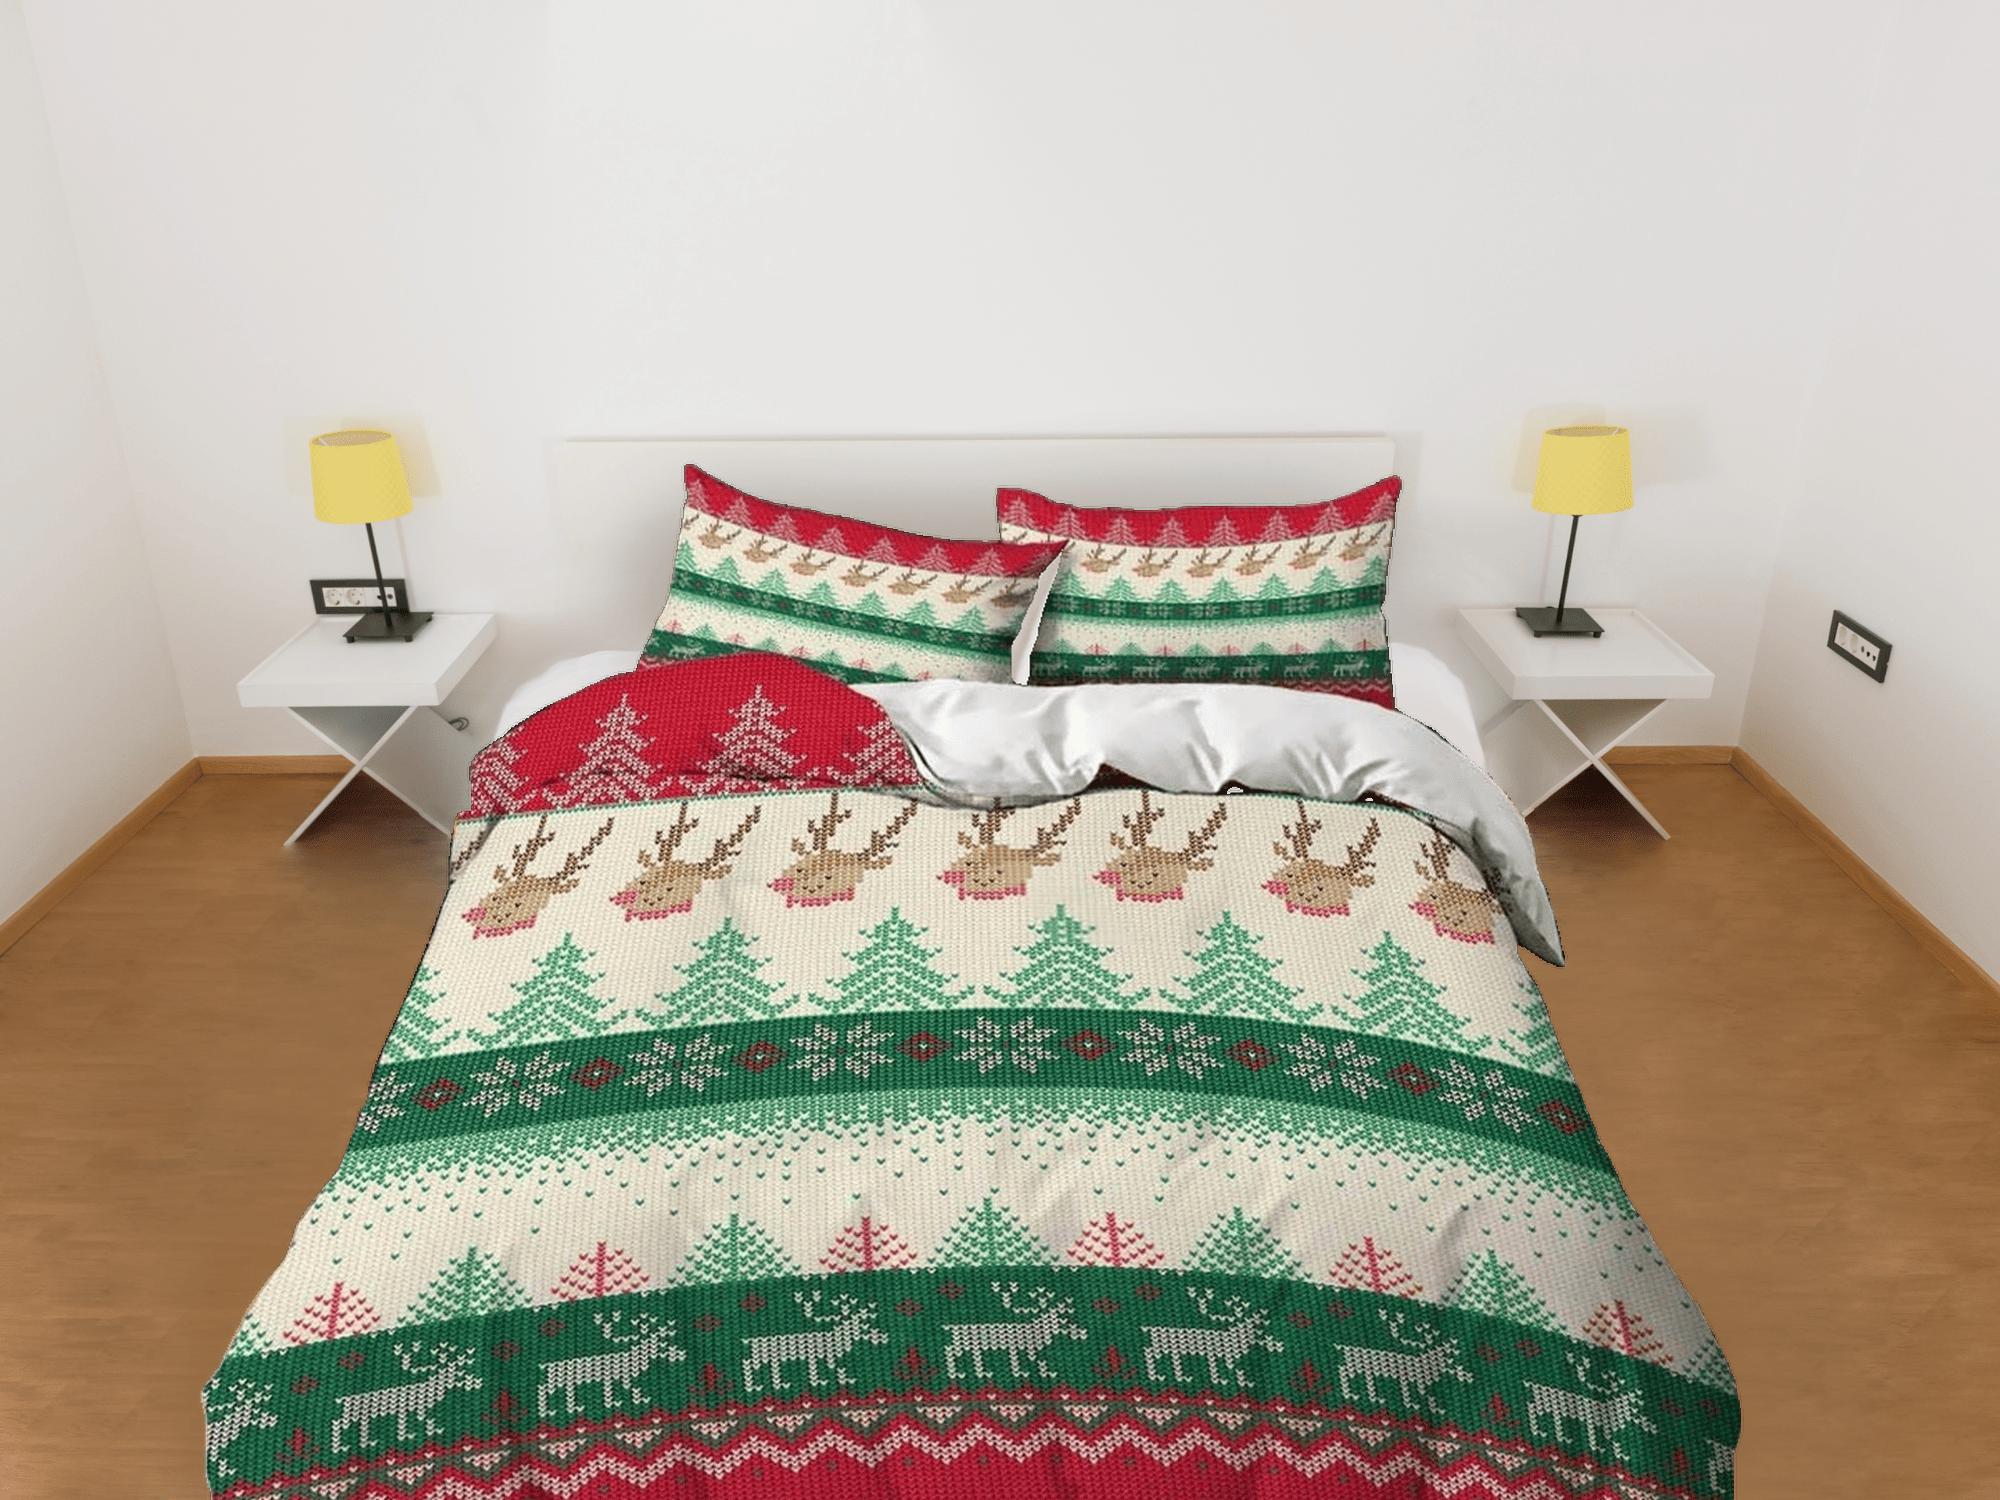 daintyduvet Cross Stitch Pattern Christmas bedding & pillowcase holiday gift duvet cover king queen full twin toddler bedding baby Christmas farmhouse